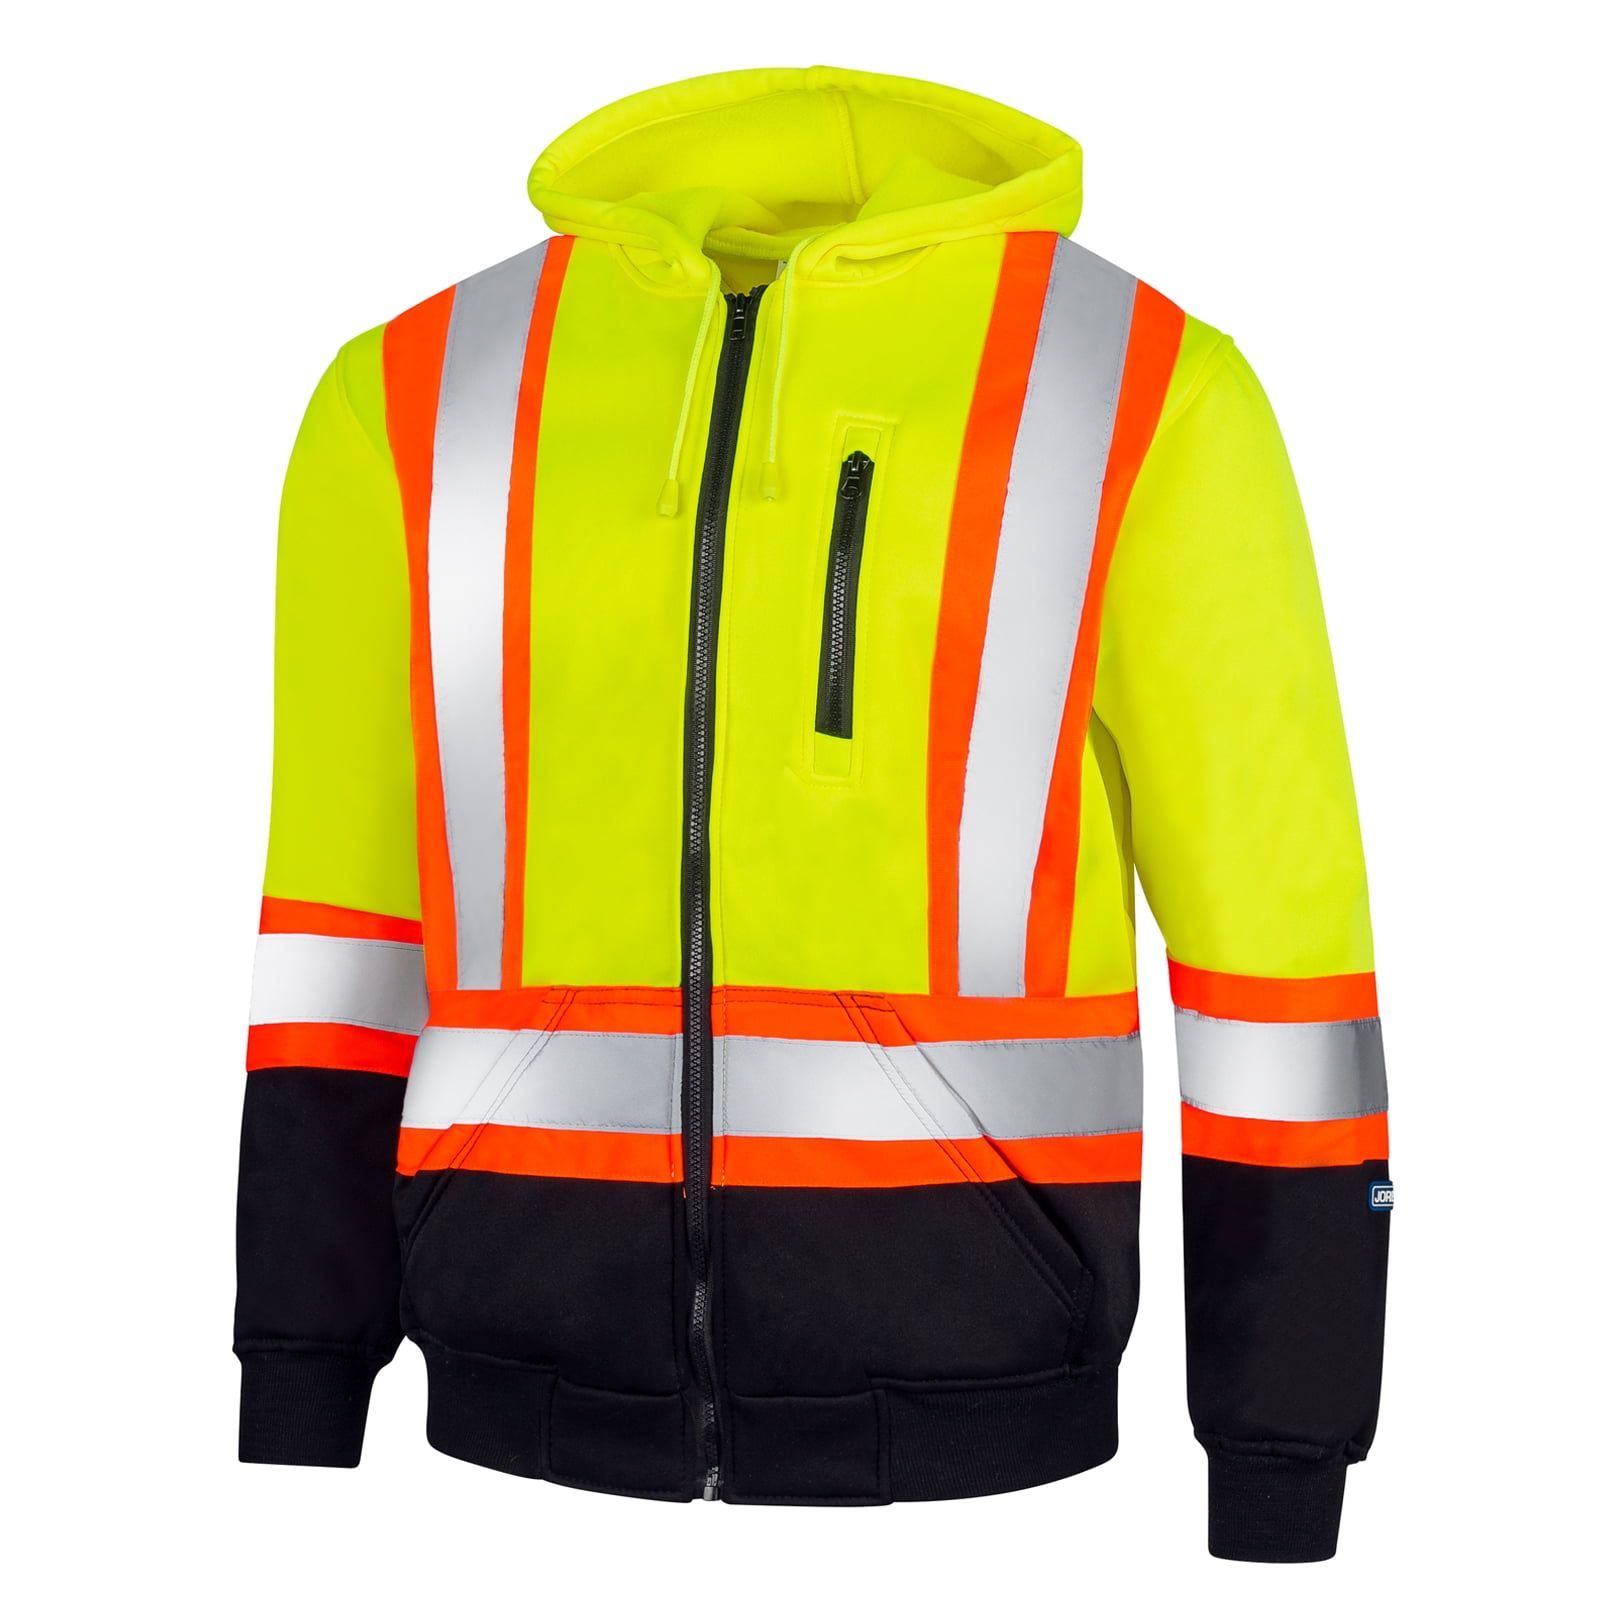 JORESTECH Hi-Vis Safety Full-Zip Hoodie, Two-Toned, ANSI Class (Yellow/ Black, L)